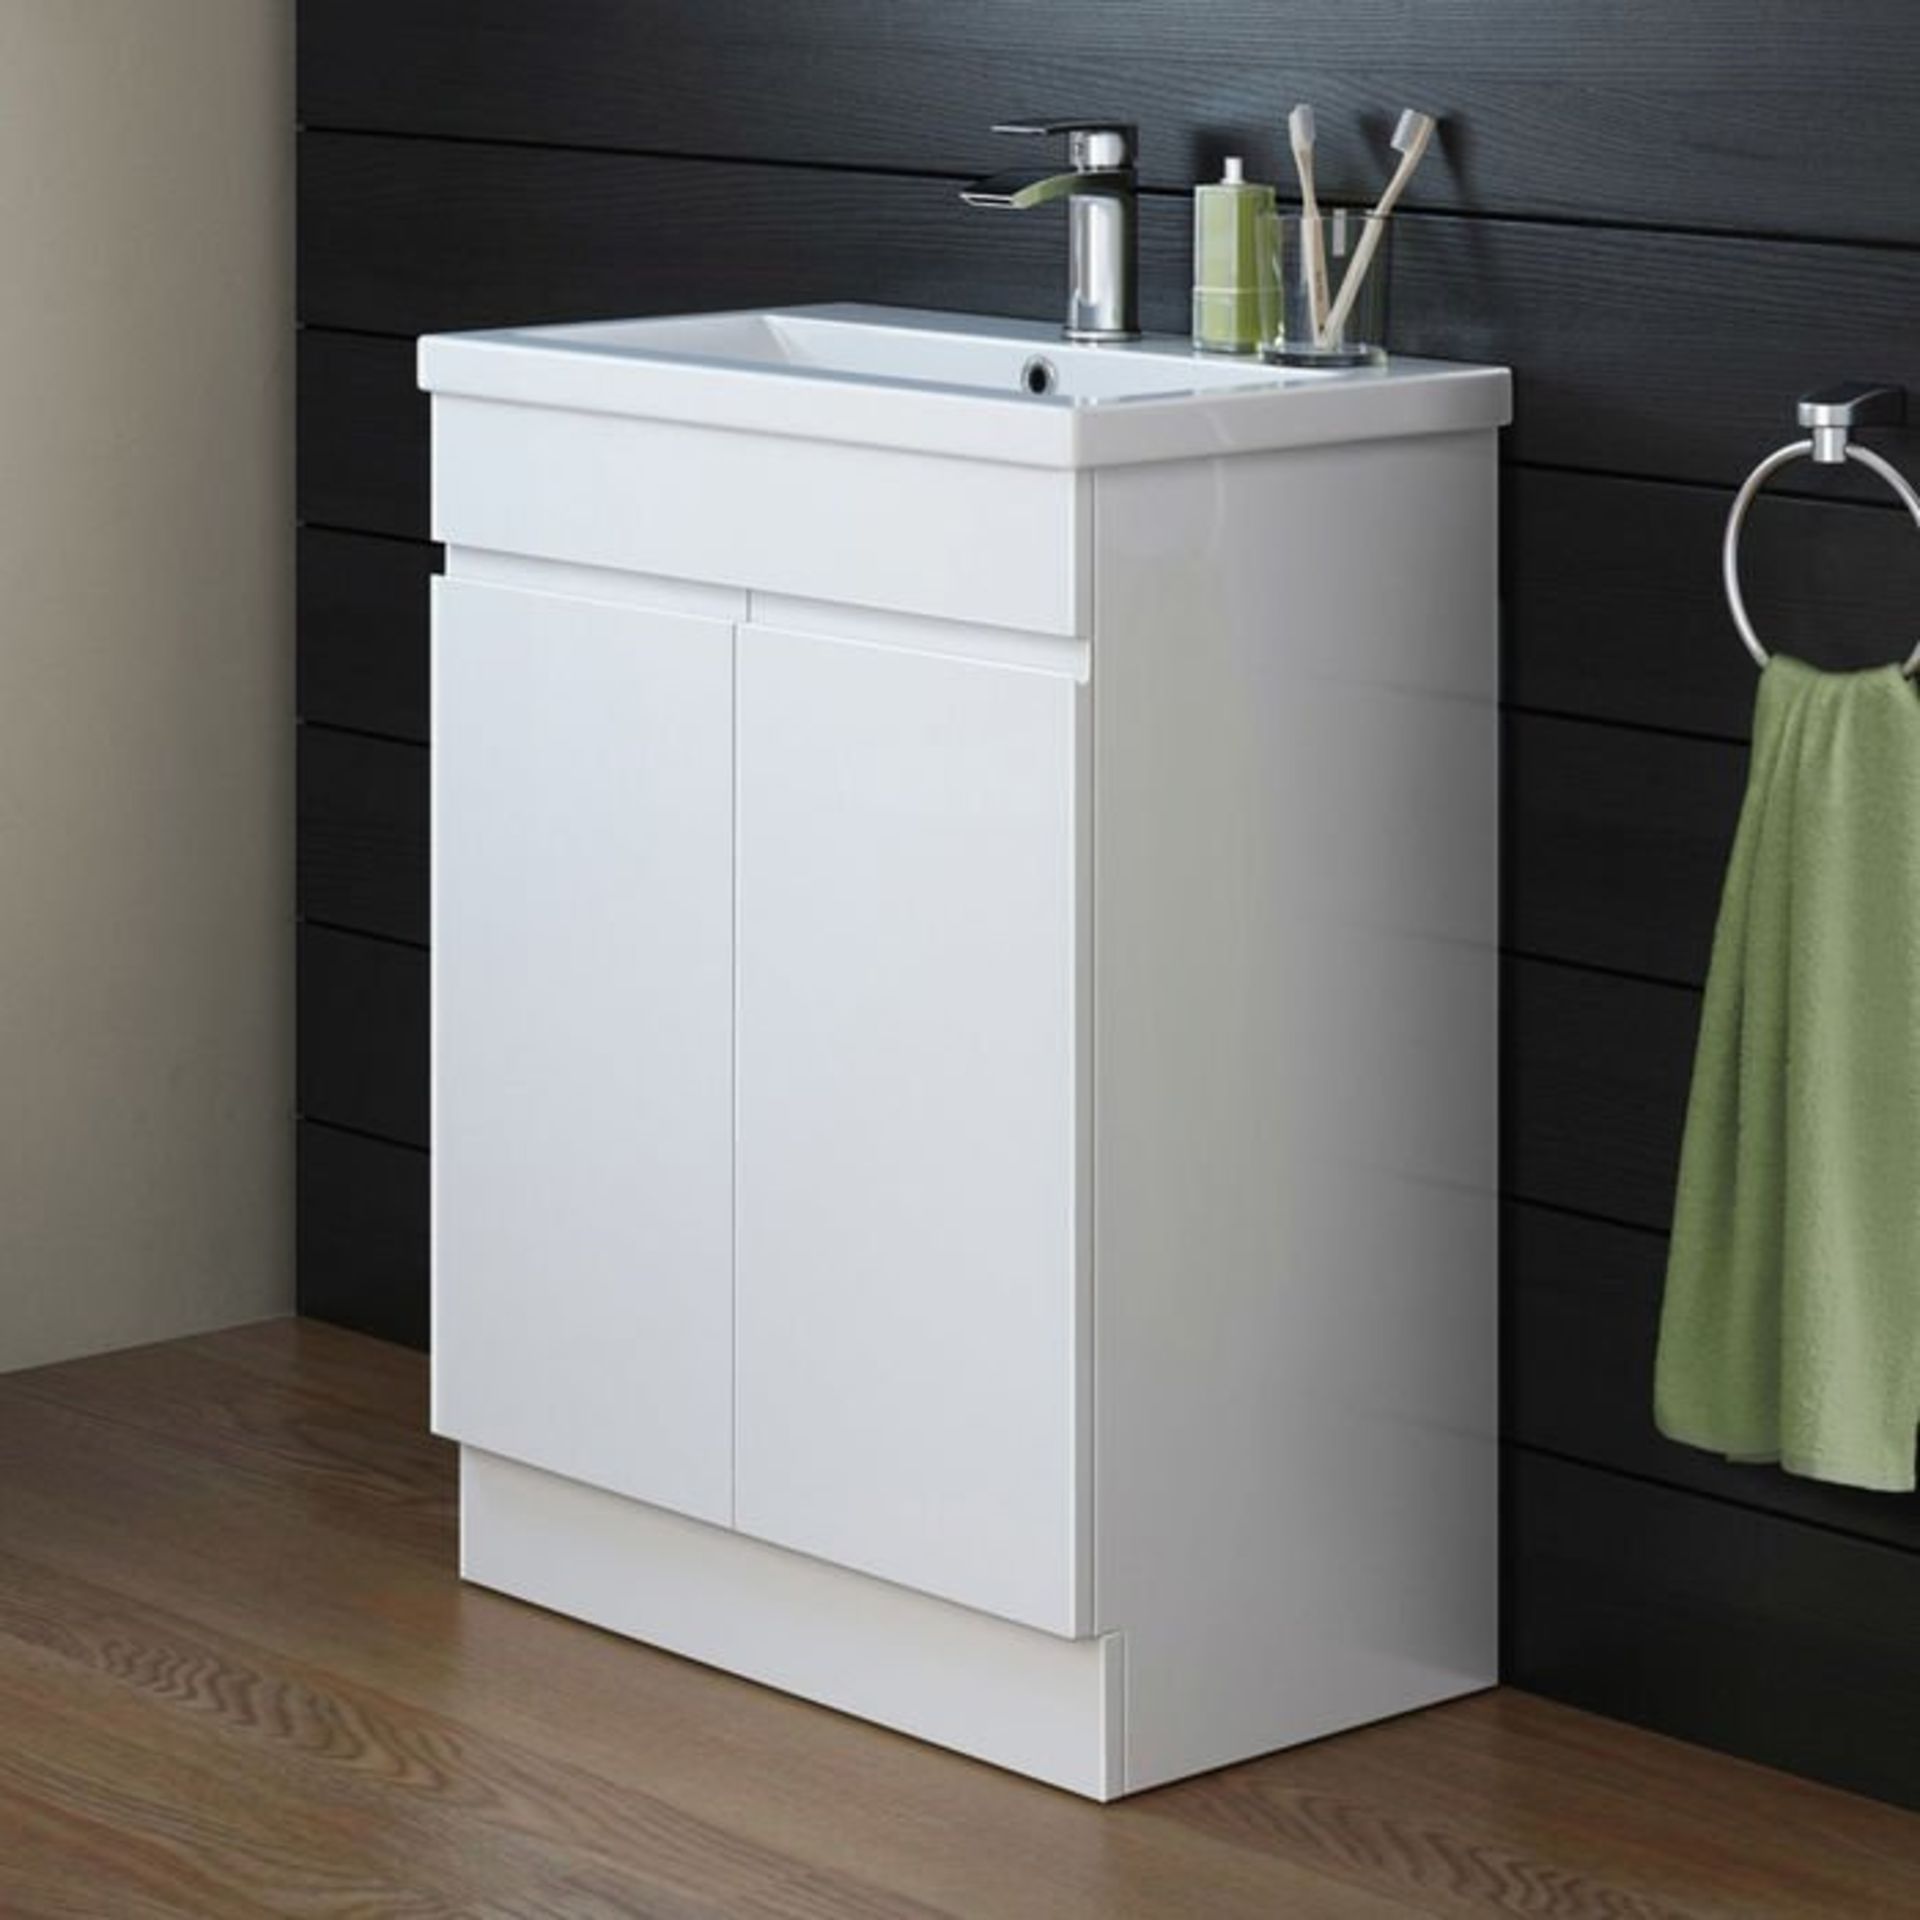 (H21) 600mm Trent High Gloss White Basin Cabinet - Floor Standing RRP £499.99. Includes groove